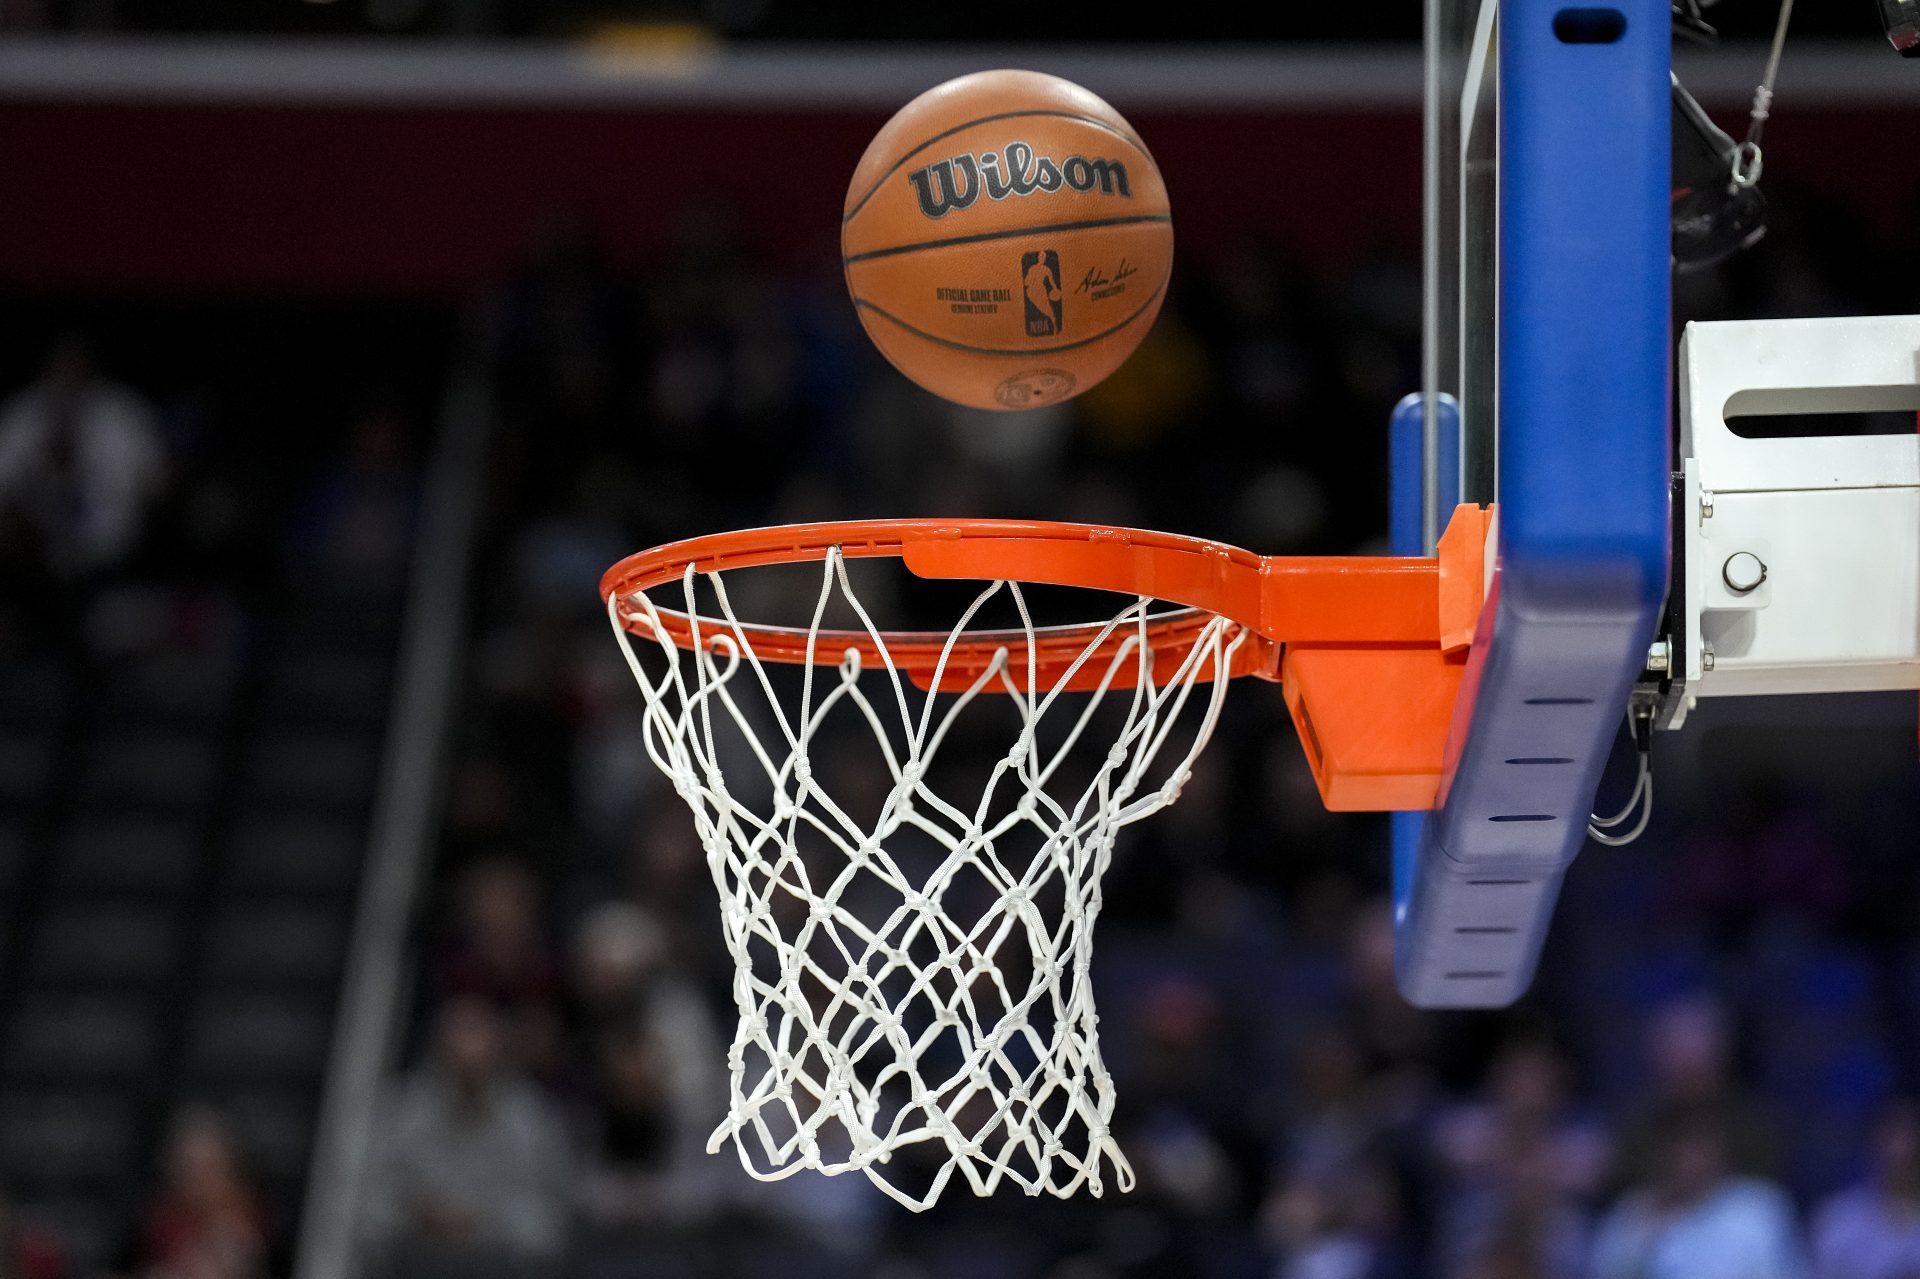 DETROIT, MICHIGAN - NOVEMBER 20: A Wilson Brand NBA official game ball is pictured falling through a basketball hoop and net before the game between the Detroit Pistons and Denver Nuggets at Little Caesars Arena on November 20, 2023 in Detroit, Michigan. NOTE TO USER: User expressly acknowledges and agrees that, by downloading and or using this photograph, User is consenting to the terms and conditions of the Getty Images License Agreement.